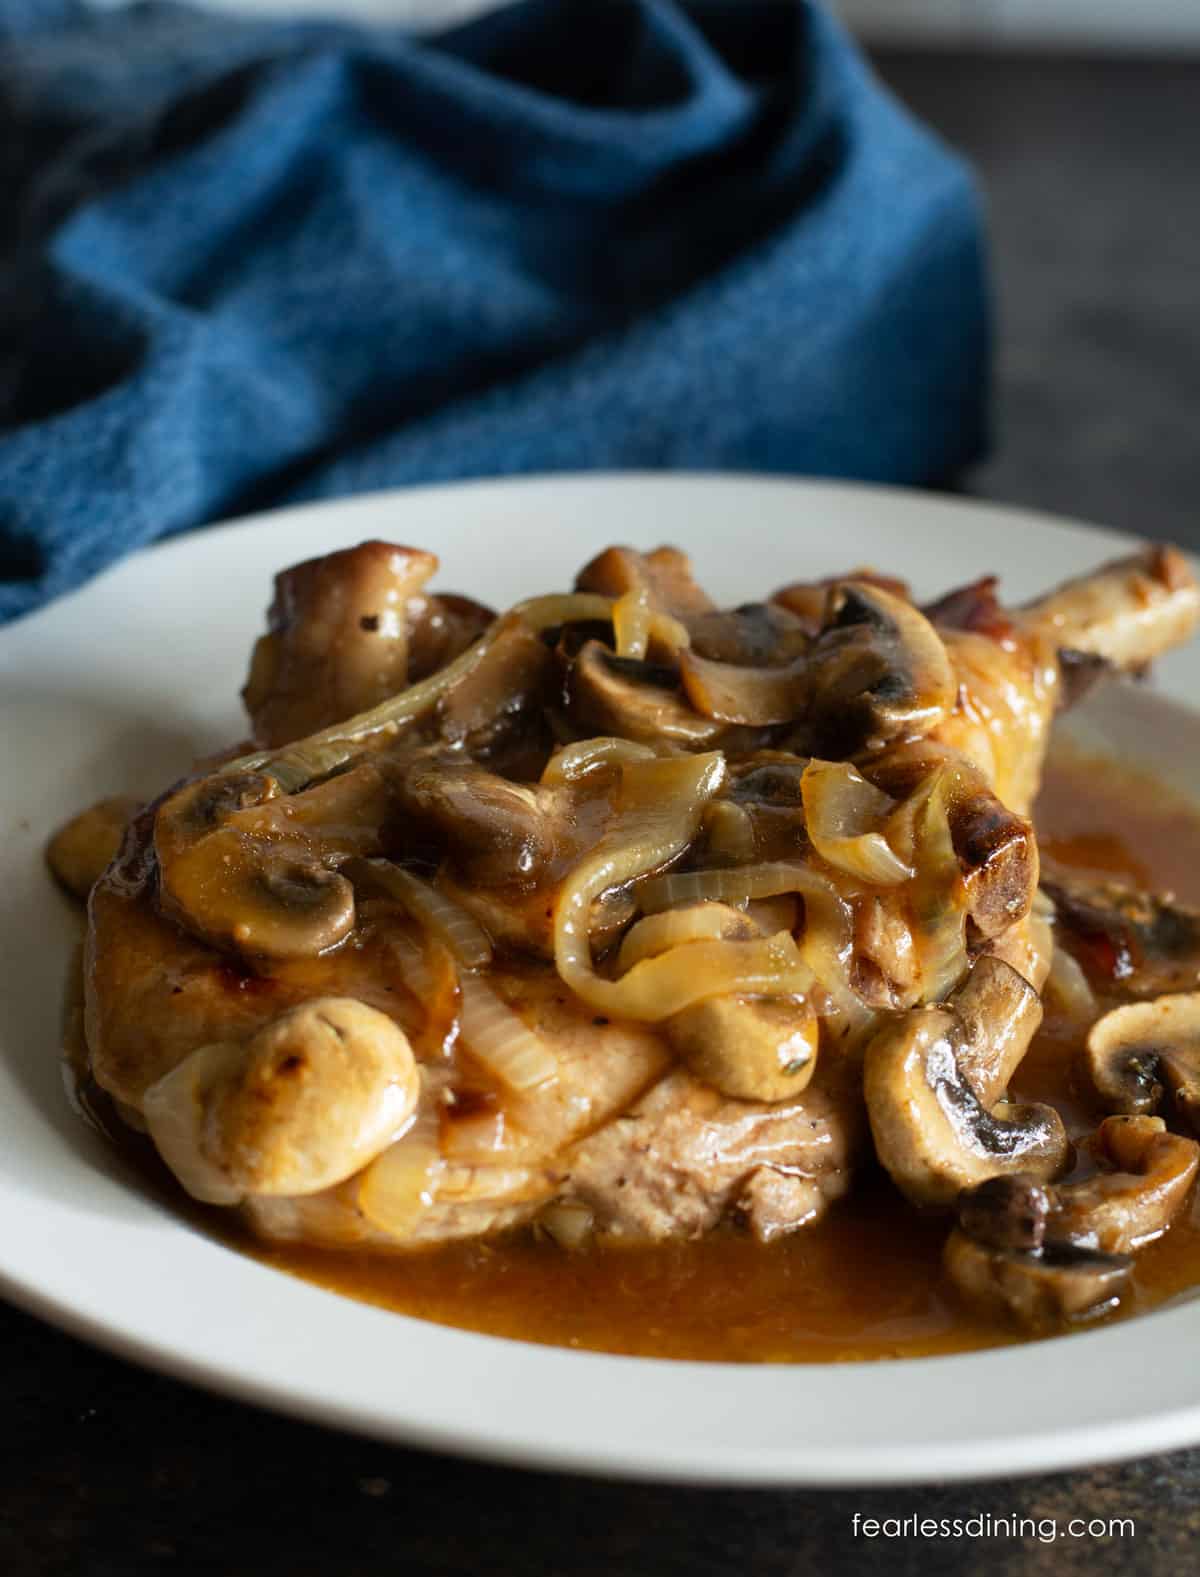 A large bone-in pork chop topped with caramelized onions and mushrooms on a white plate.